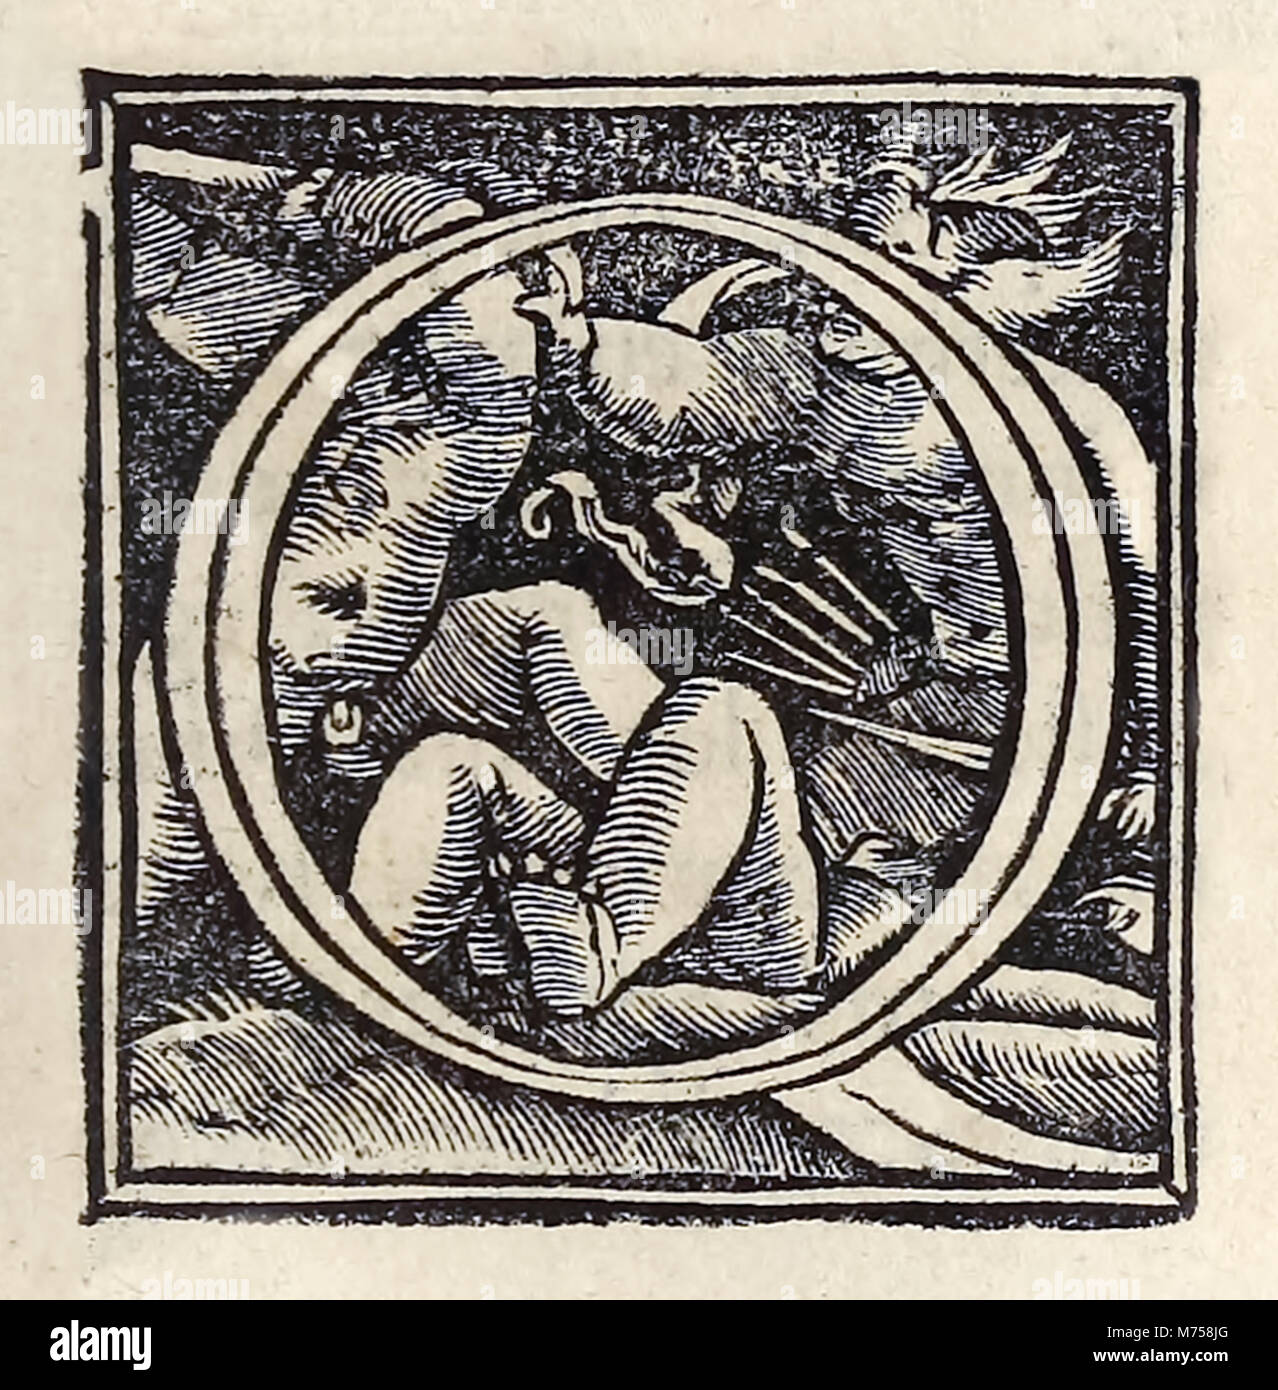 Illuminated 'O' from the 1518 Basel third edition of ‘Utopia’ by Sir Thomas More (1478–1535) first published in 1516. Woodcut by Hans Holbein the Younger (c.1497-1543) showing putti fighting. See more information below. Stock Photo